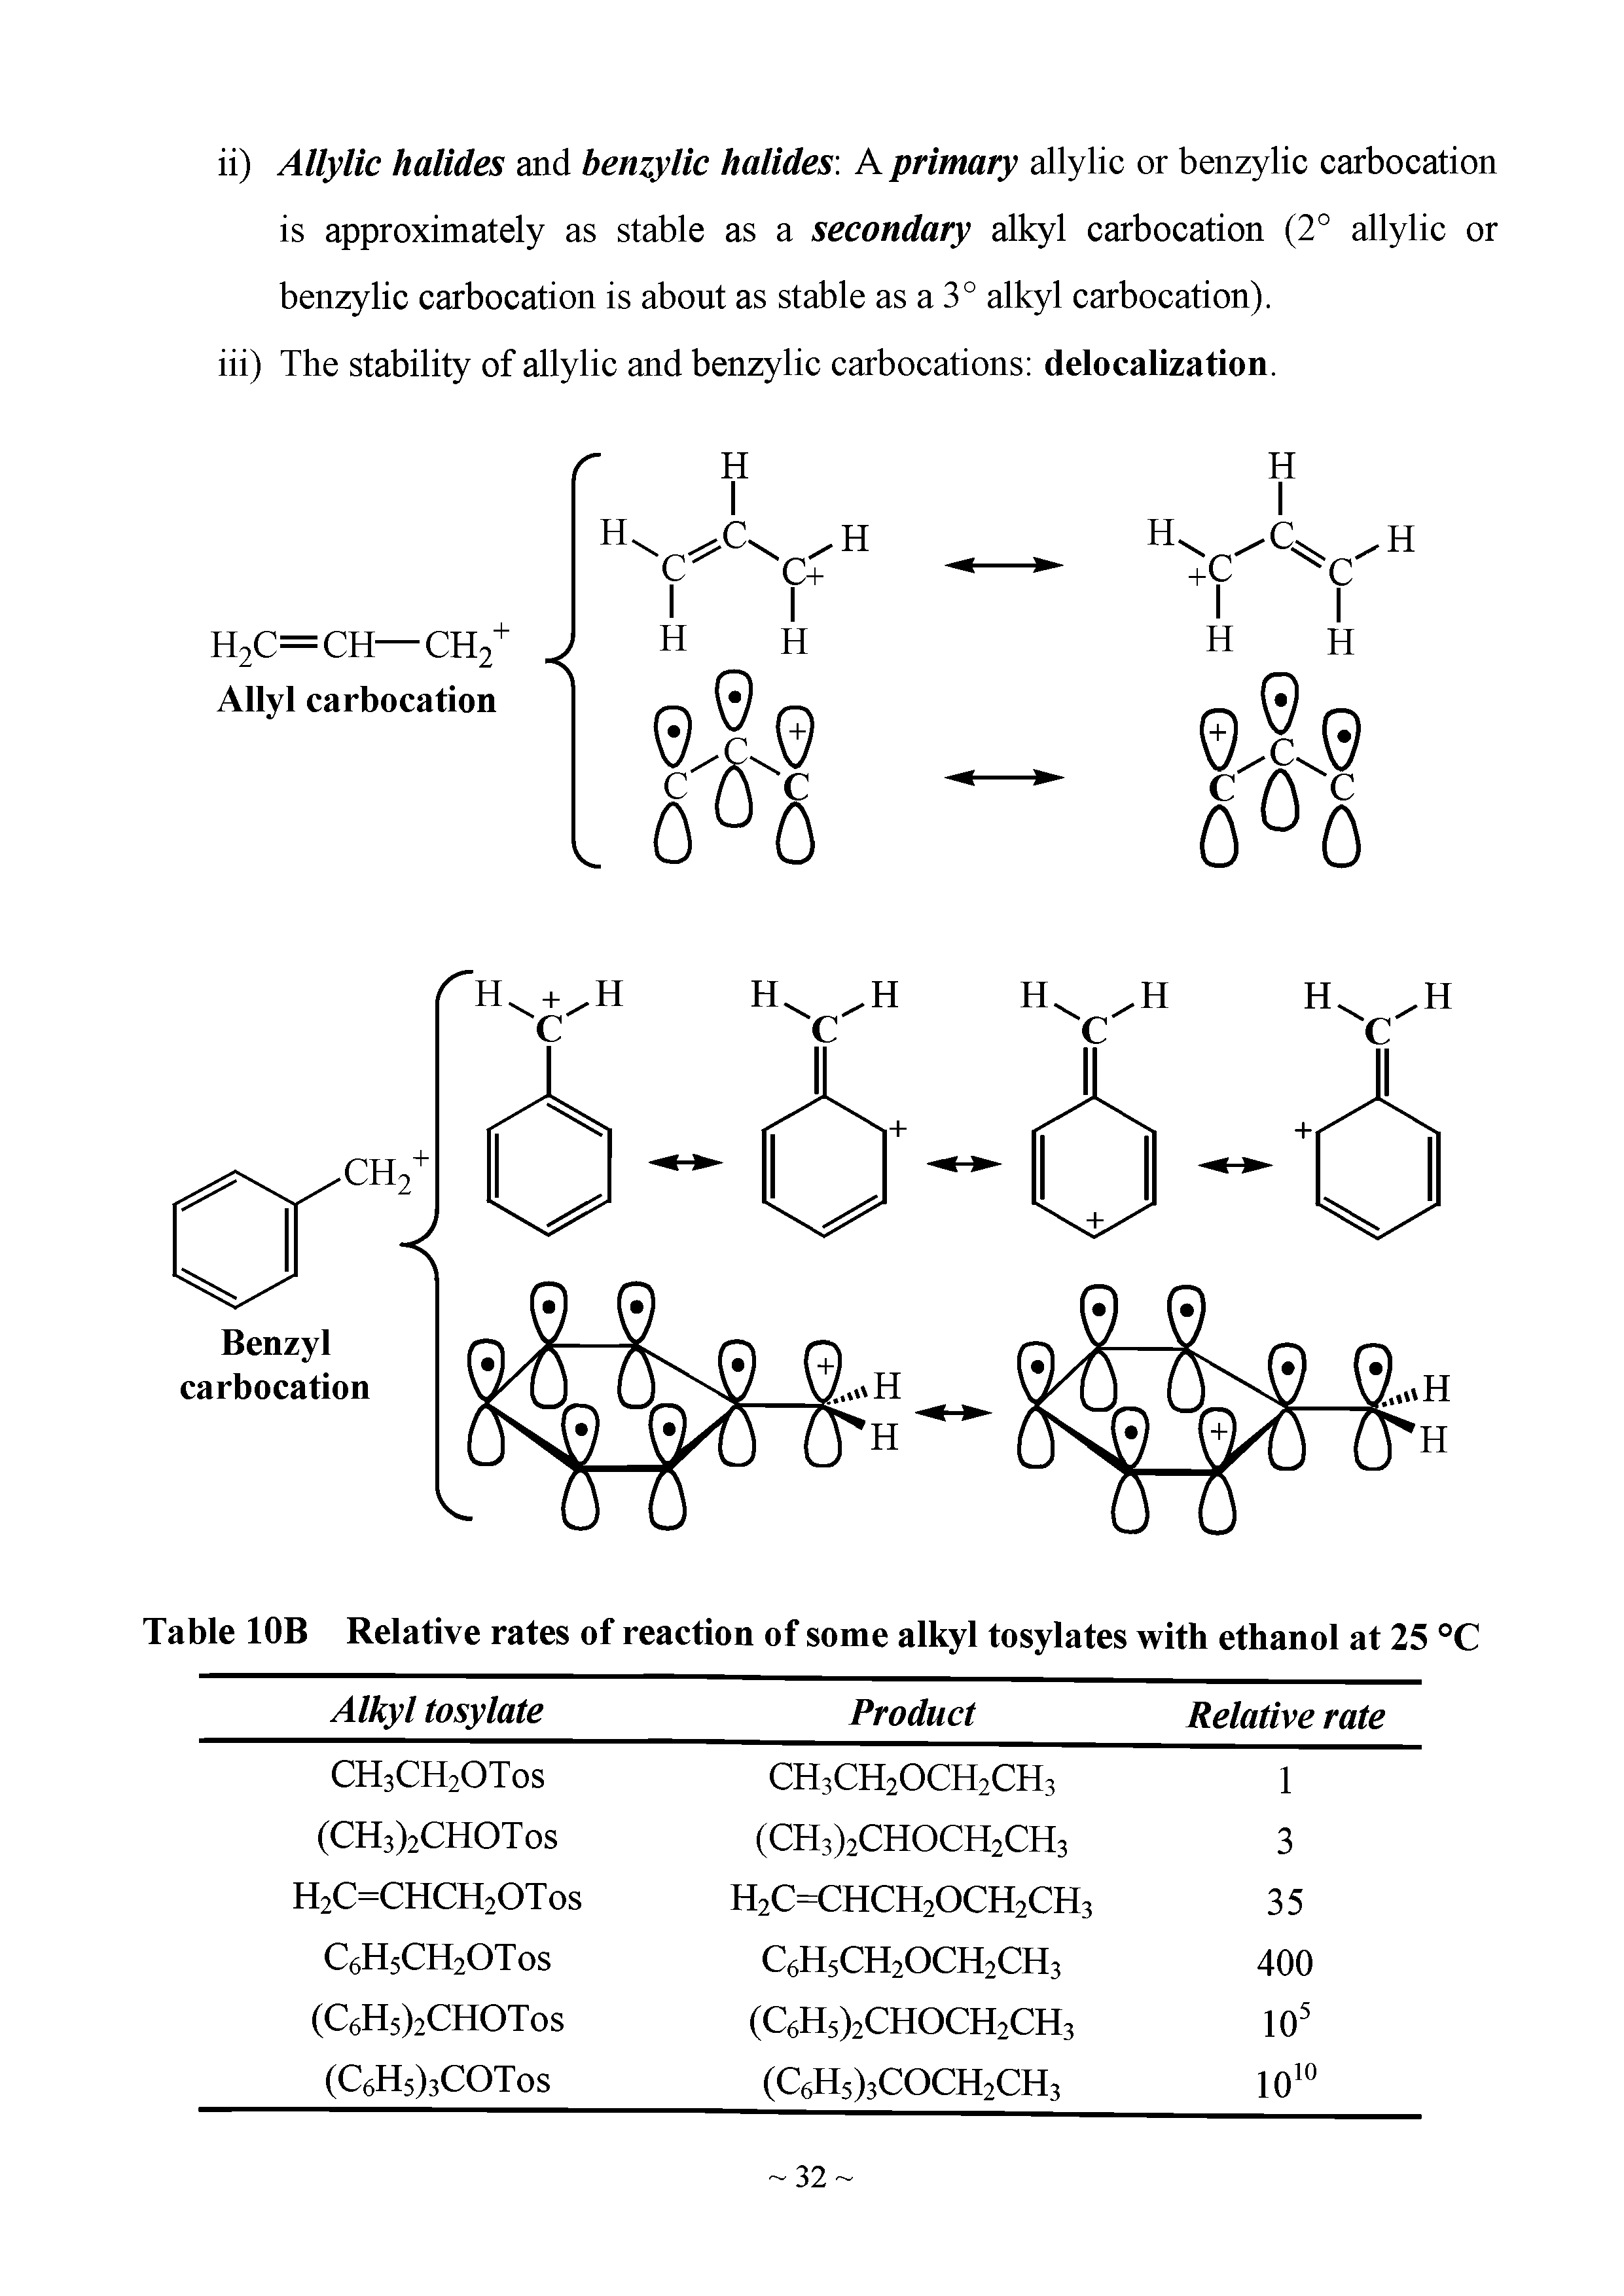 Table 10B Relative rates of reaction of some alkyl tosylates with ethanol at 25 °C...